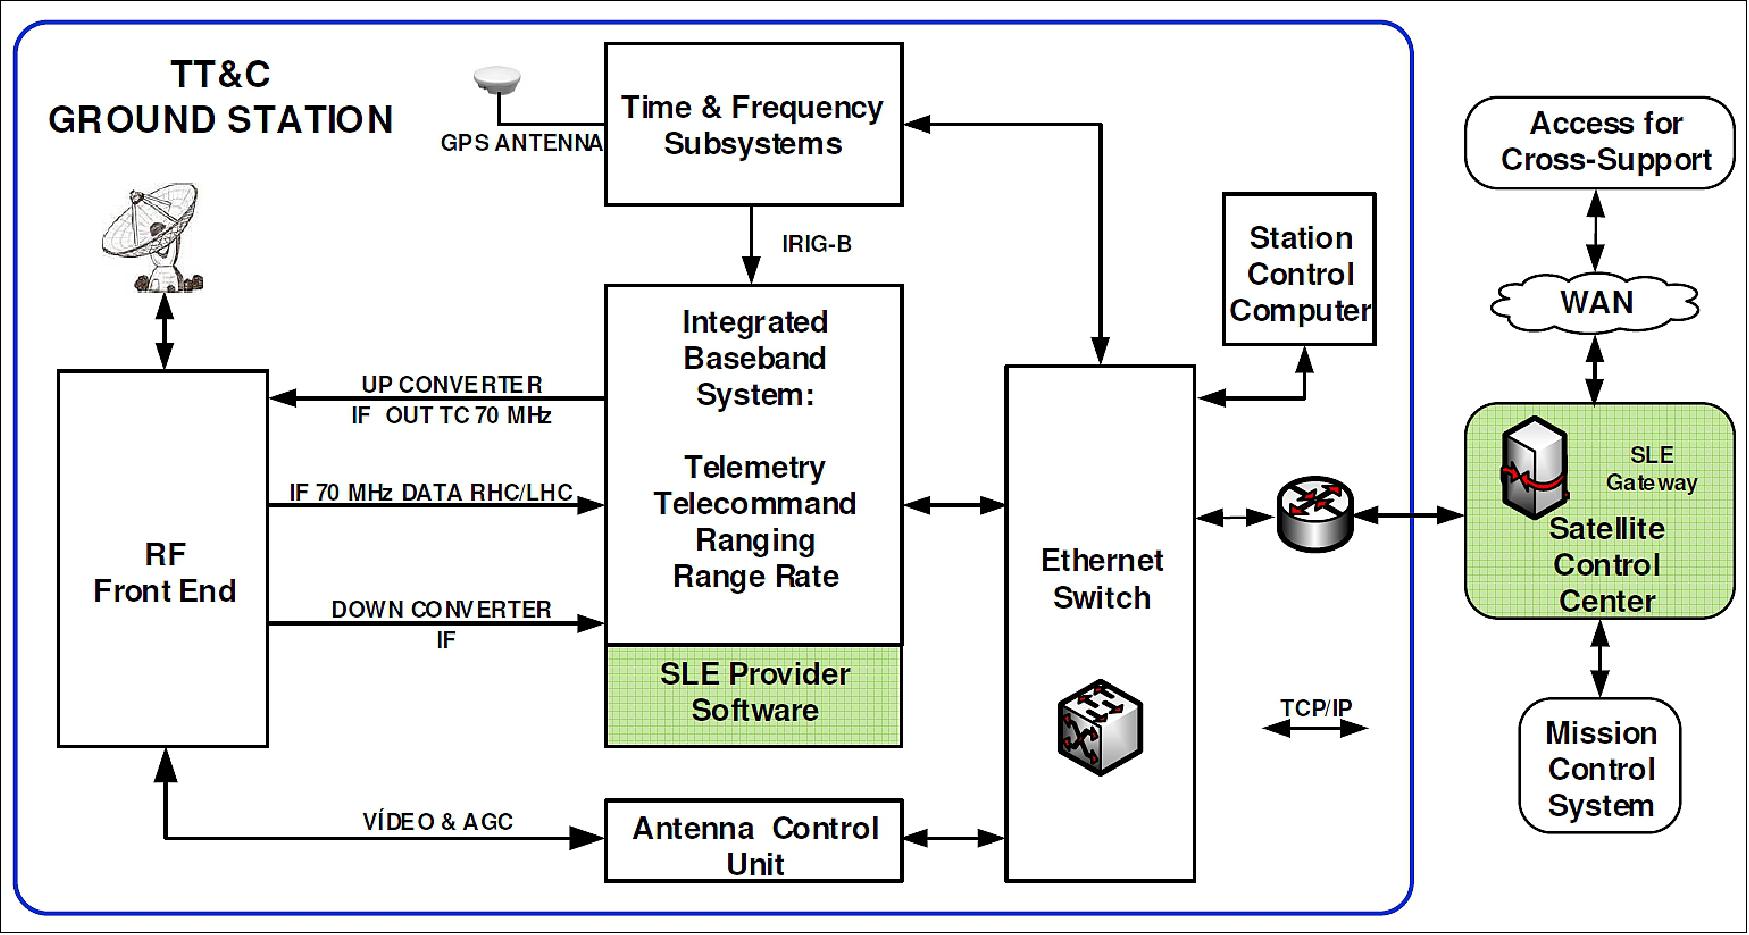 Figure 12: INPE's Ground Station (image credit: INPE)